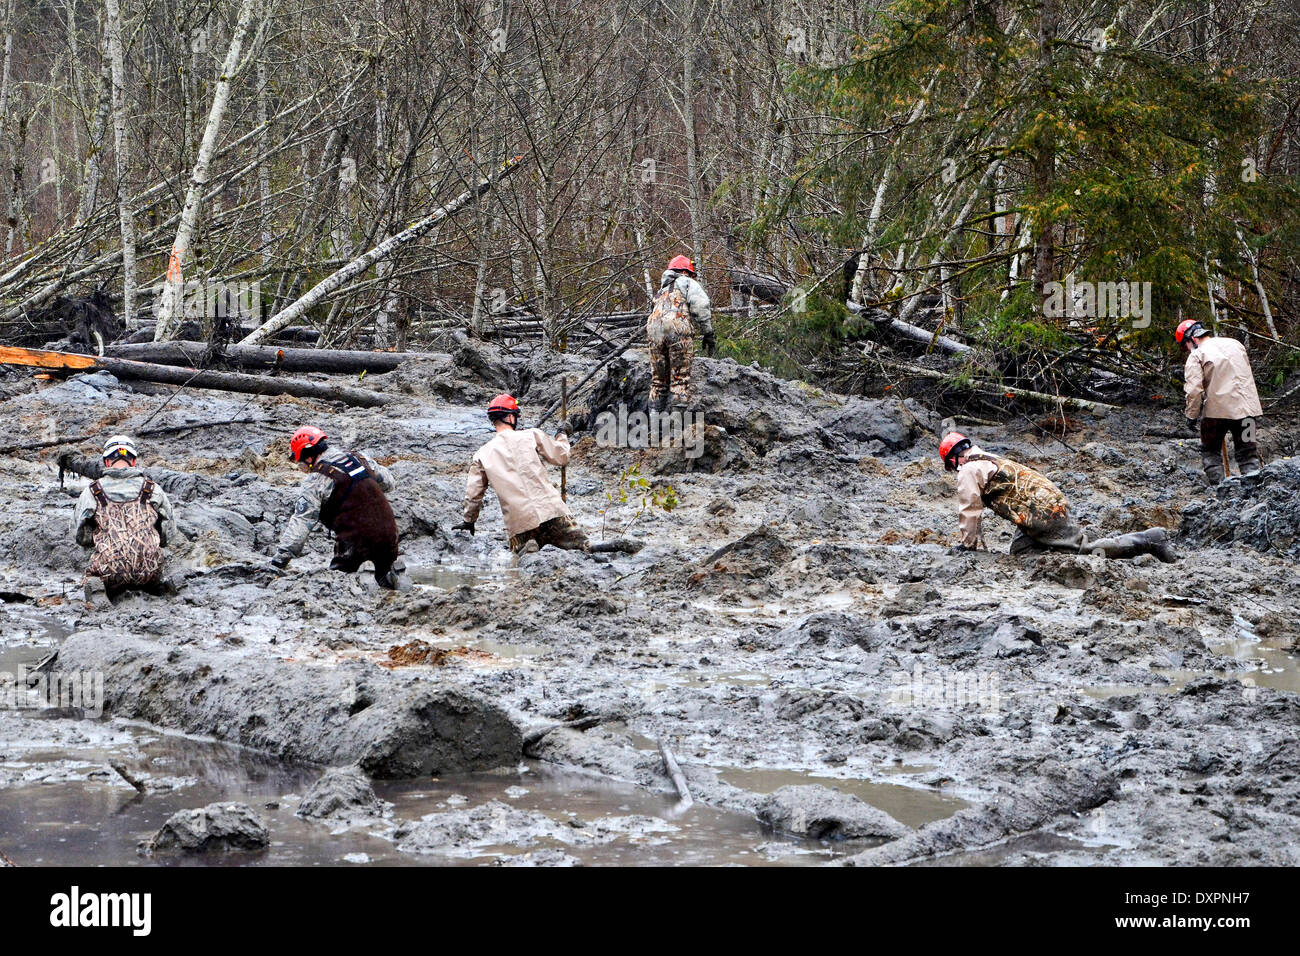 Oso, Washington, USA . 28th Mar, 2014. Rescue workers continue efforts to locate victims of a massive landslide that killed at least 28 people and destroyed a small riverside village in northwestern Washington state March 28, 2014 in Oso, Washington. Credit:  Planetpix/Alamy Live News Stock Photo